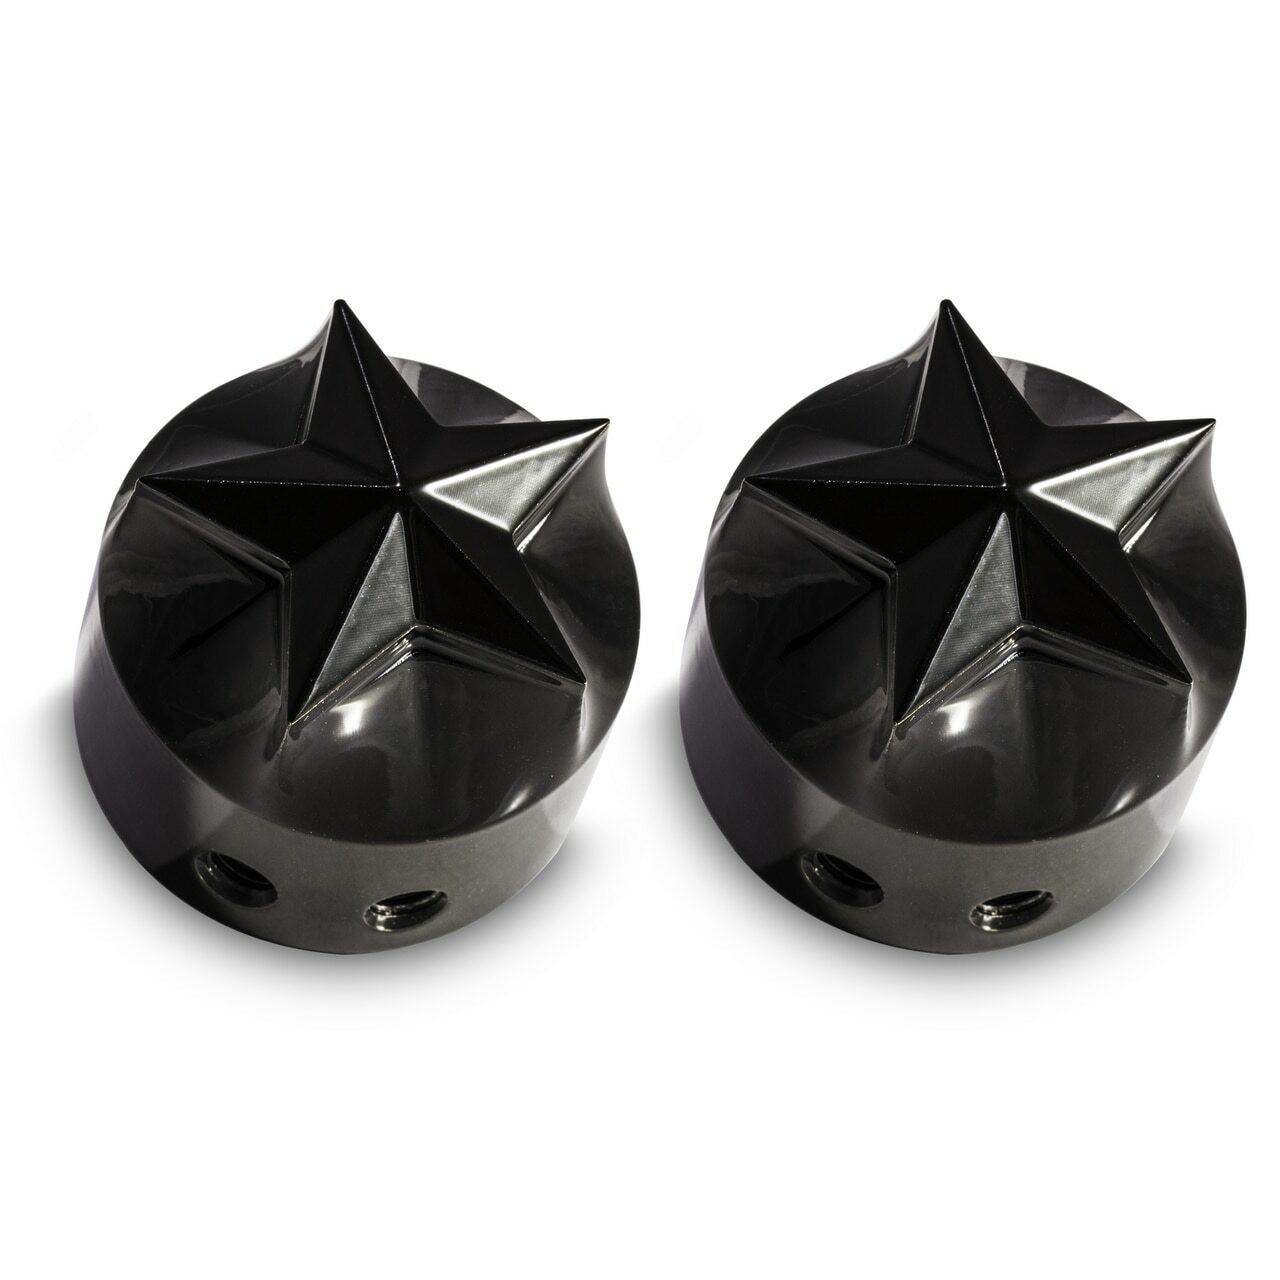 Black Star Harley Davidson Road Glide front axle covers